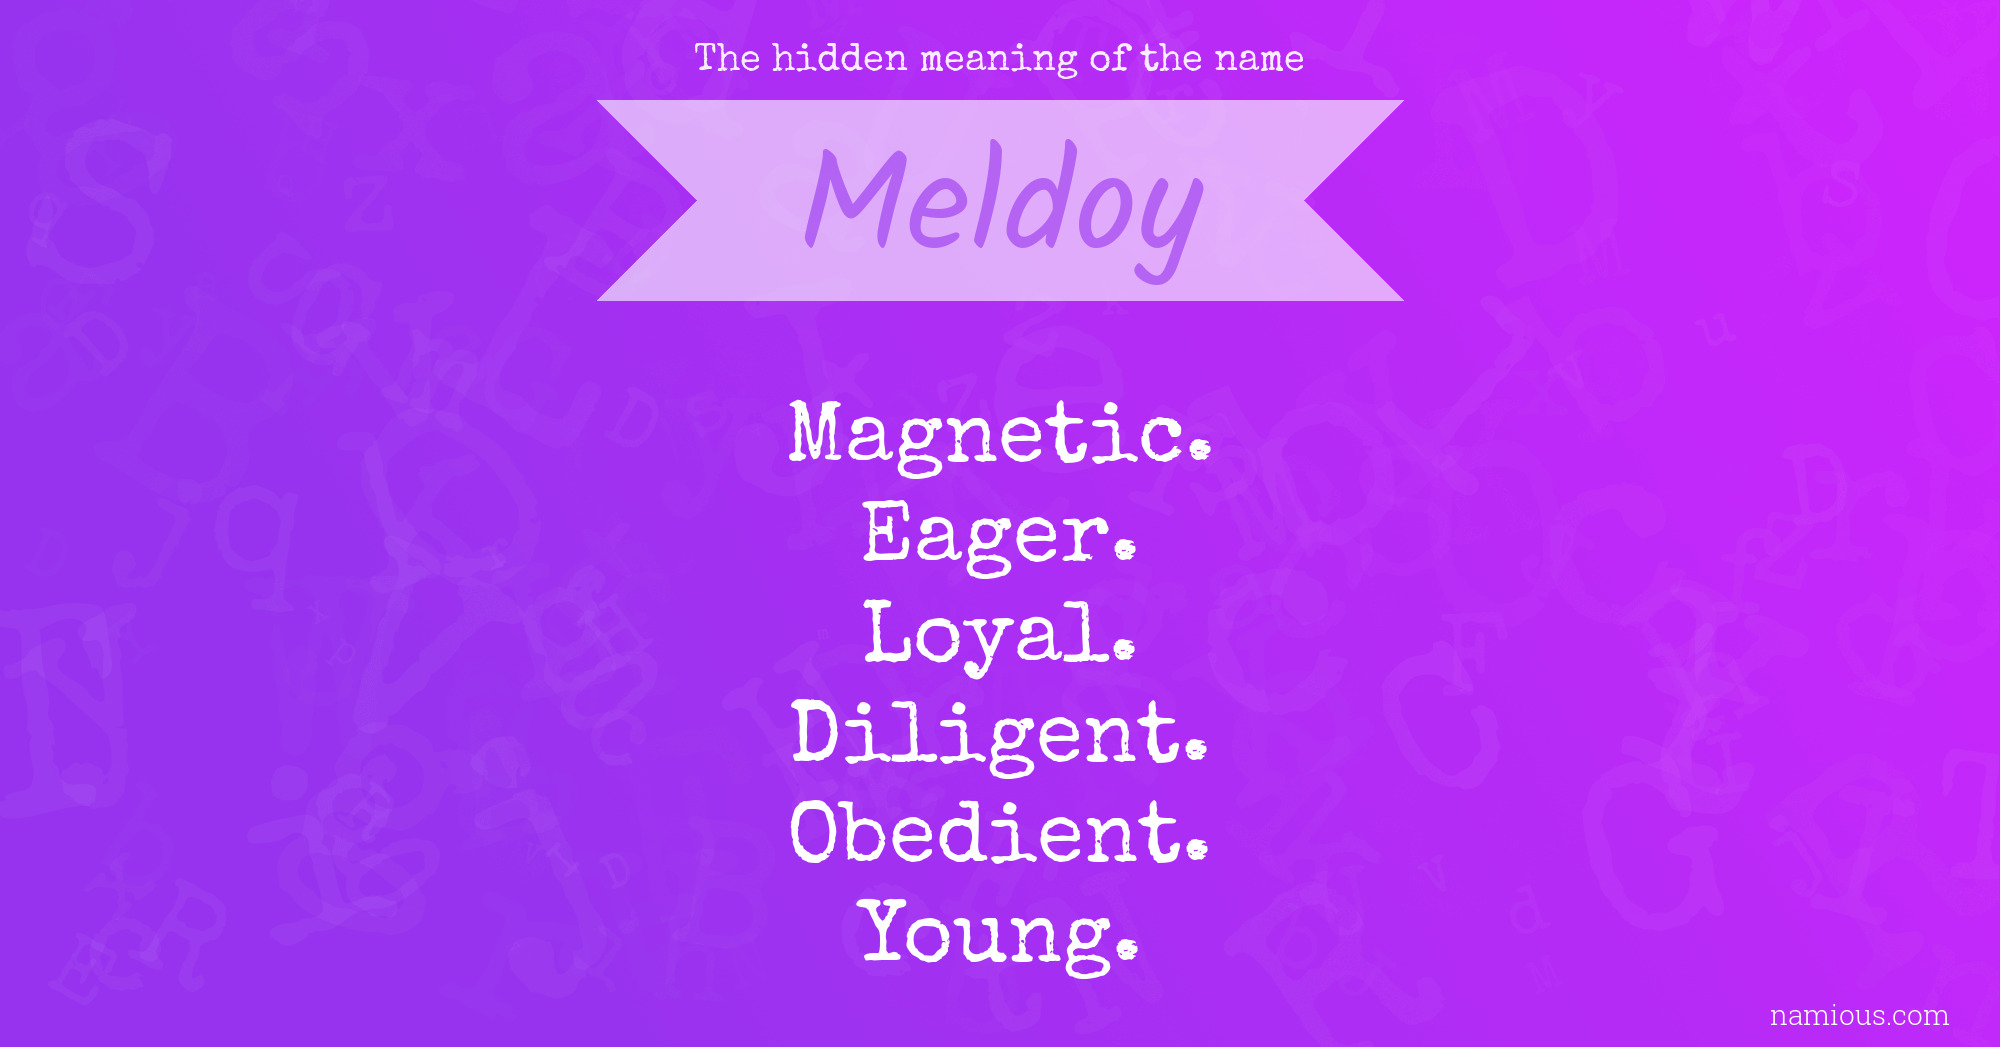 The hidden meaning of the name Meldoy